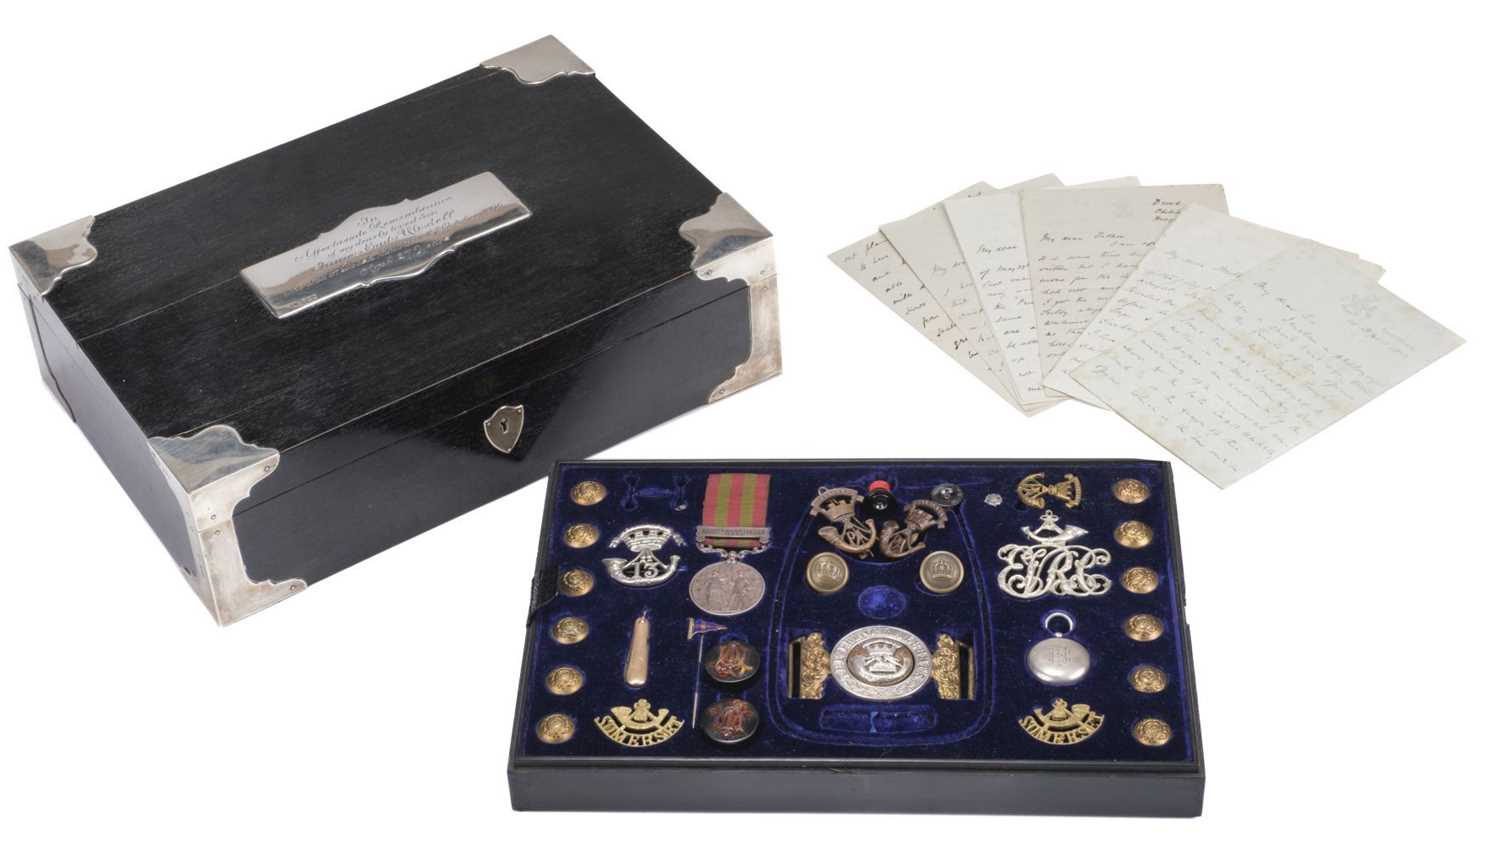 Lot 526 - Ubsdell Family. A collection of military items belonging to Lieutenant James Eads Ubsdell